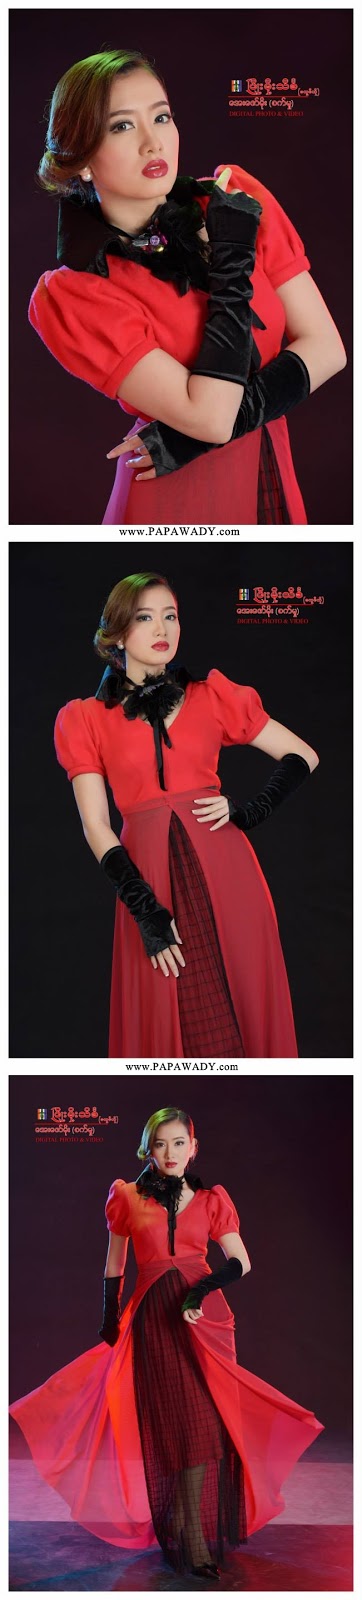 Yu Thandar Tin with the Red Queen Fashion Dress